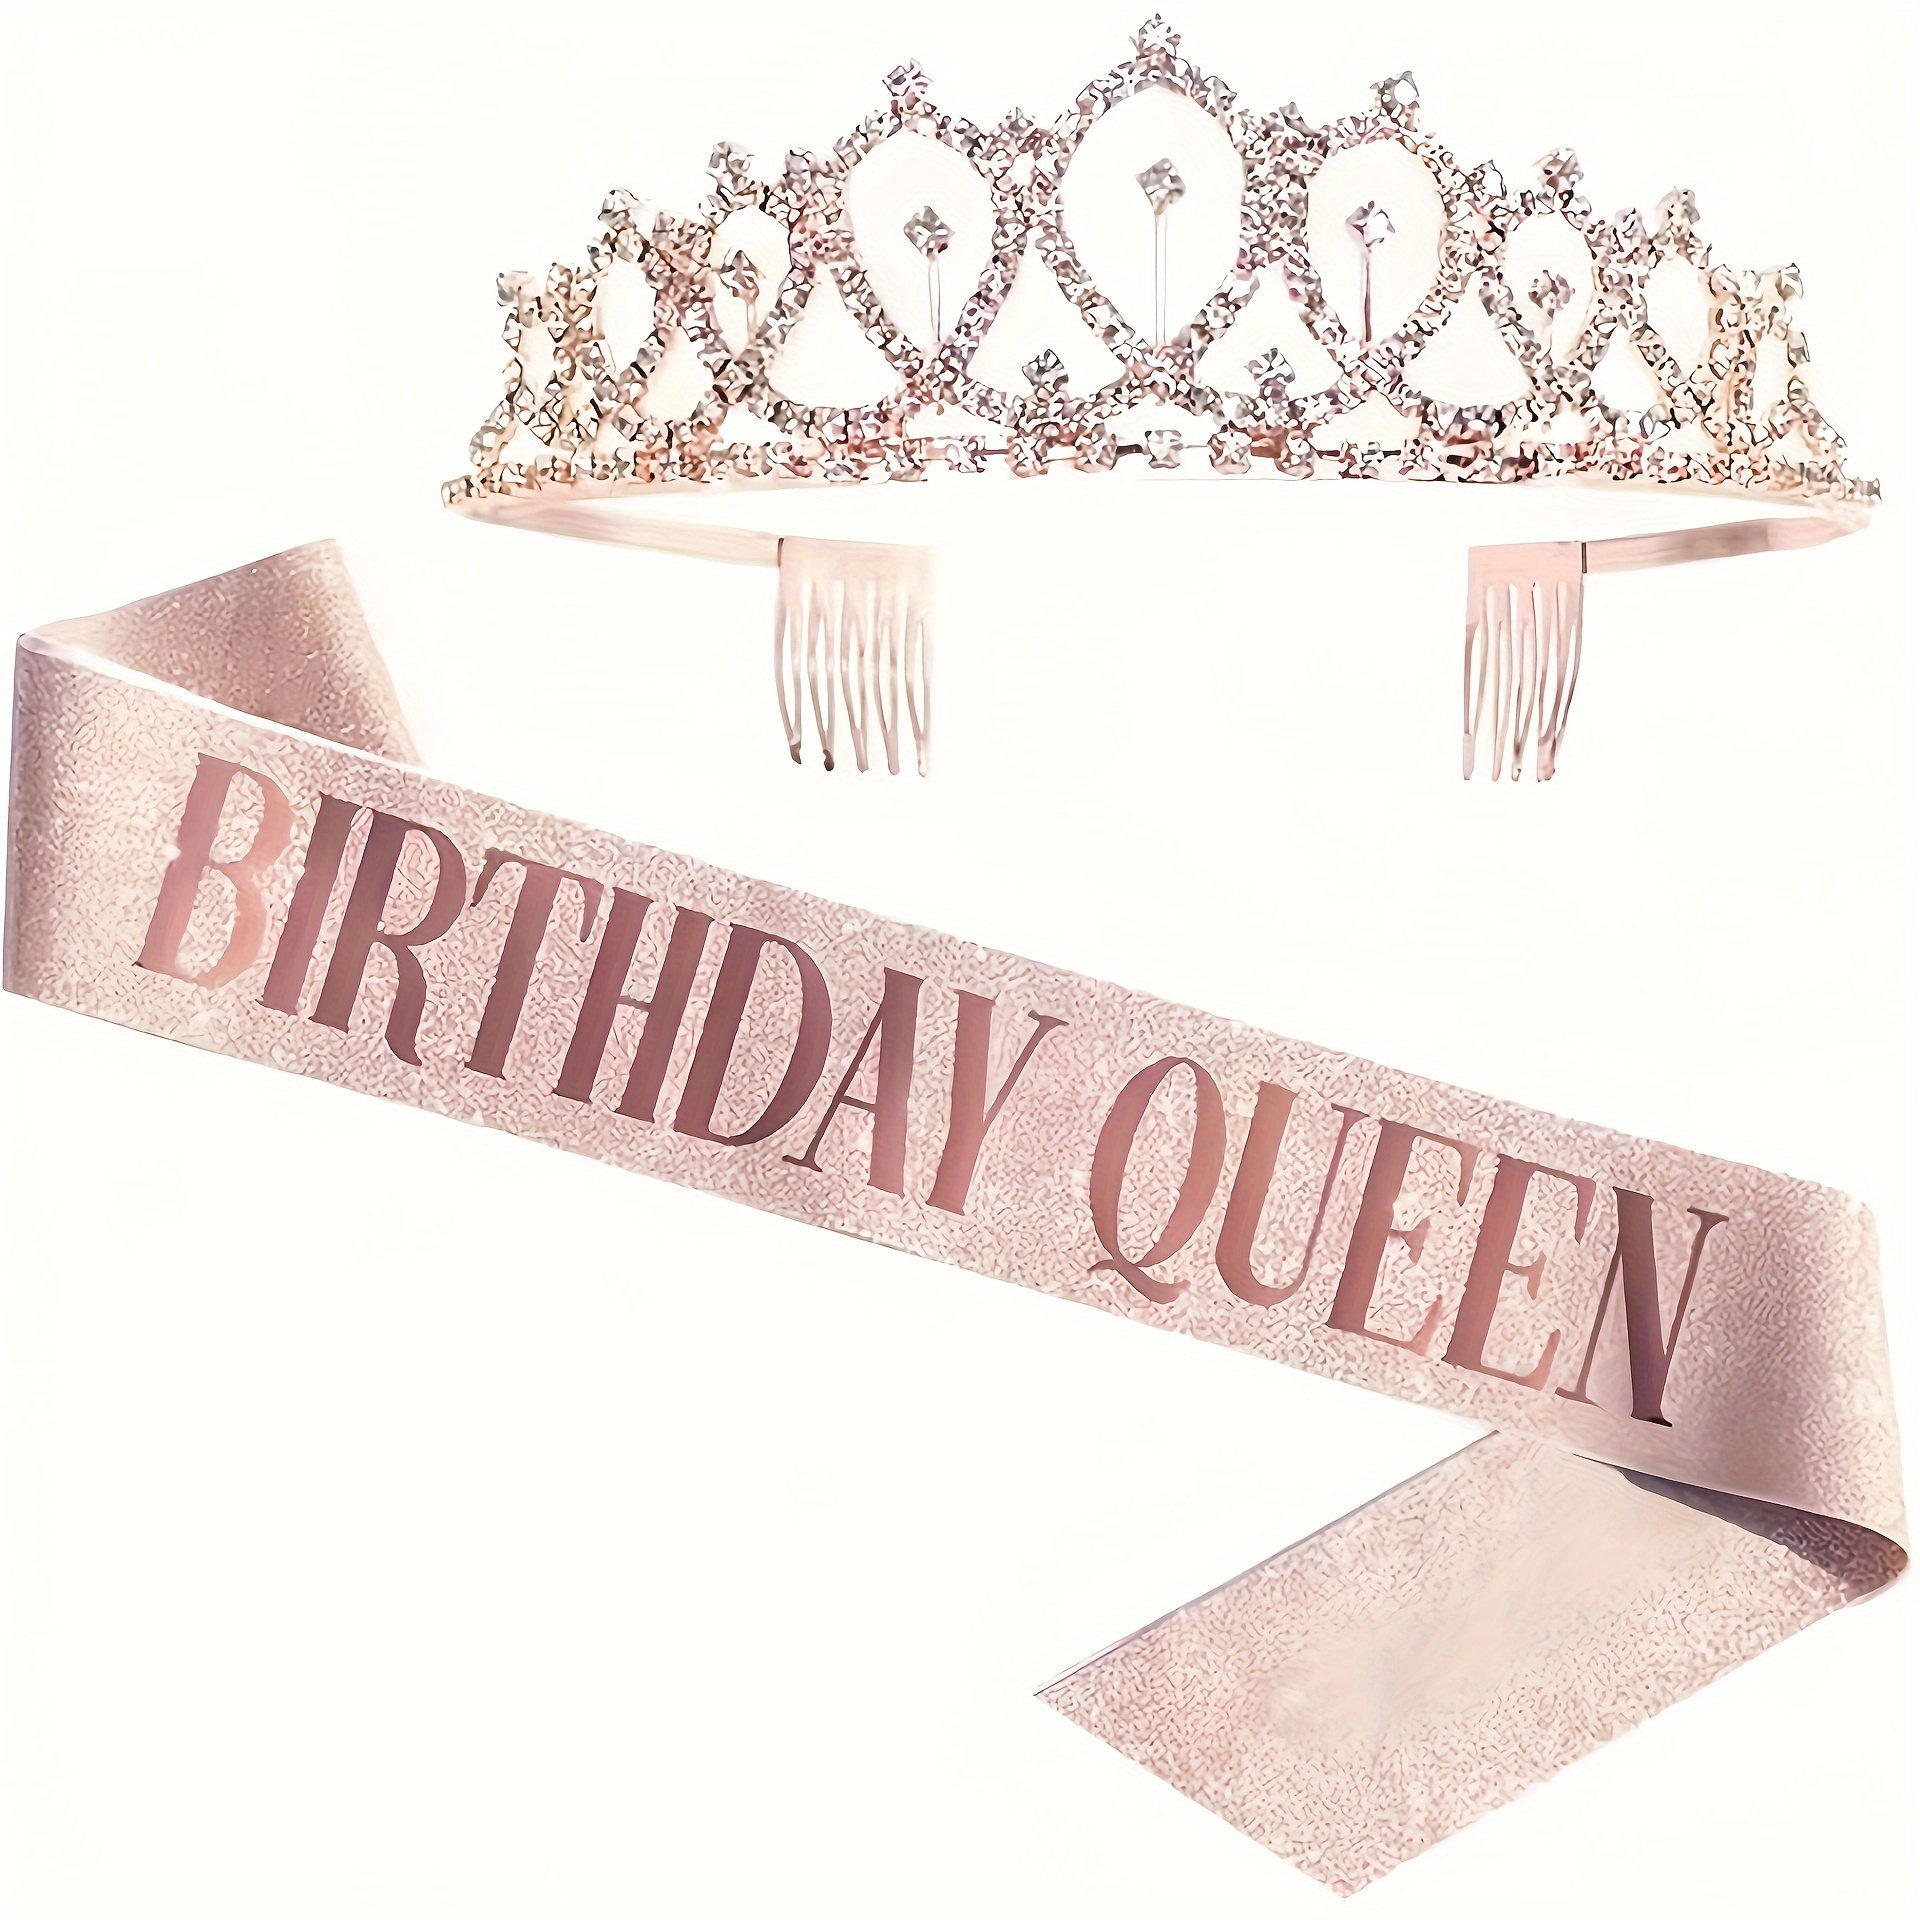 

Birthday Queen Crown & Sash Set - Alloy, Perfect For Parties & Celebrations, Ages 14+ Birthday Crown For Women Birthday Sash For Women